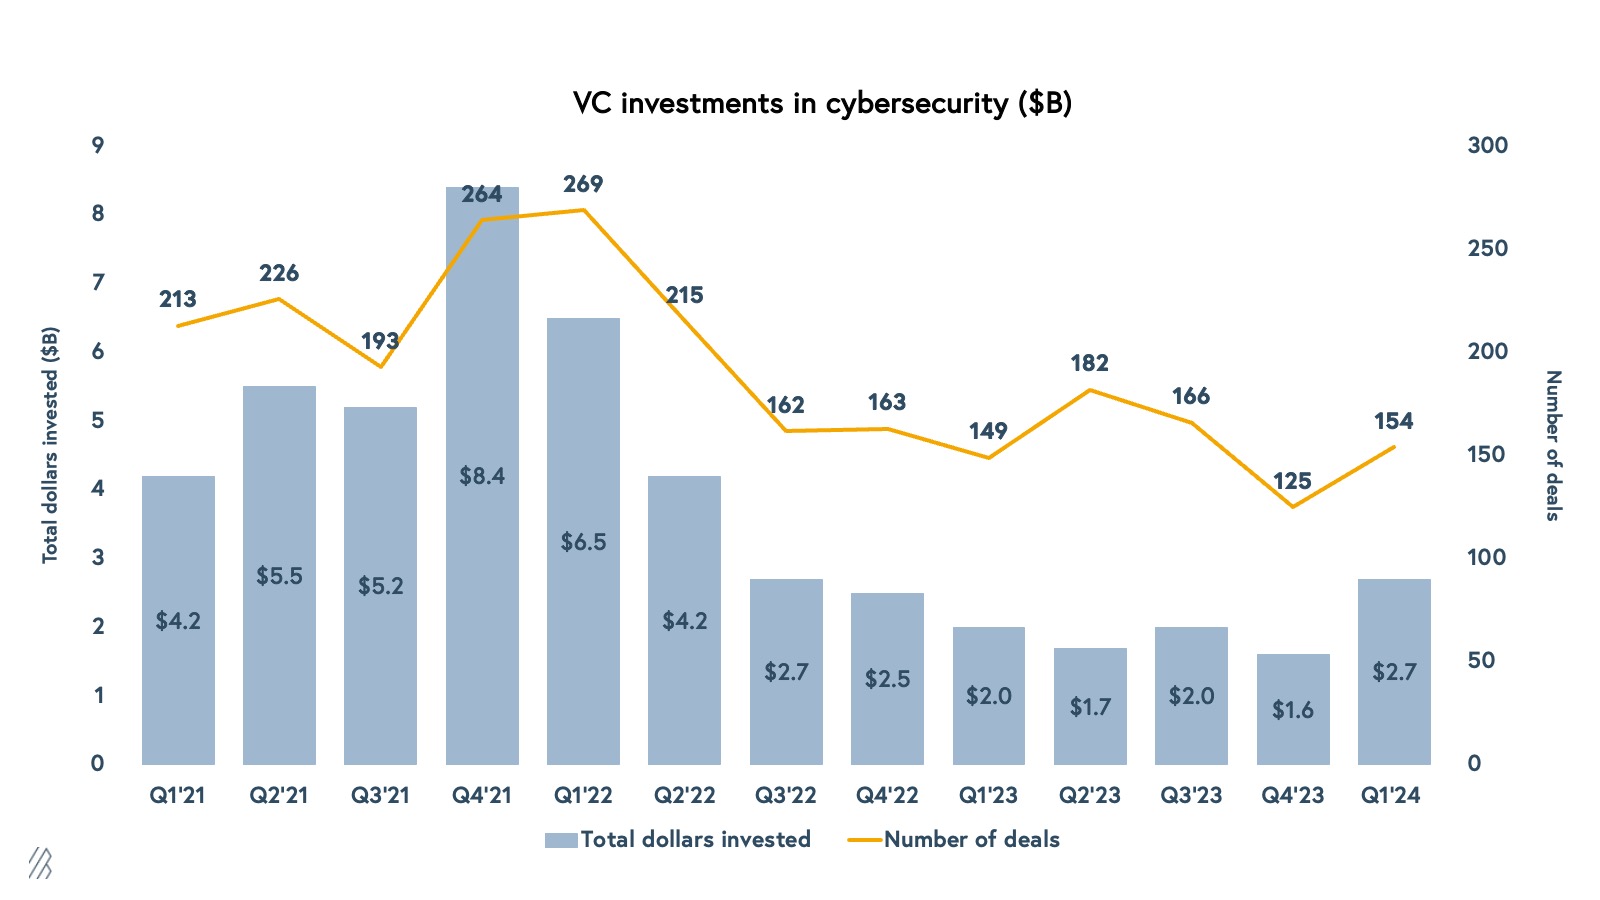 Since VC’s peak investment activity, global cybersecurity funding has dropped 58%. In 2021, over $23.3 billion was raised by cybersecurity companies. By 2023, VC saw that number drop to $7.3 billion, mirroring the broader venture capital pullback. However, after several quarters of sluggish numbers, cybersecurity startups saw a pickup in venture dollars in the first quarter of 2024 with $2.7B total dollars invested across 154 deals. 
